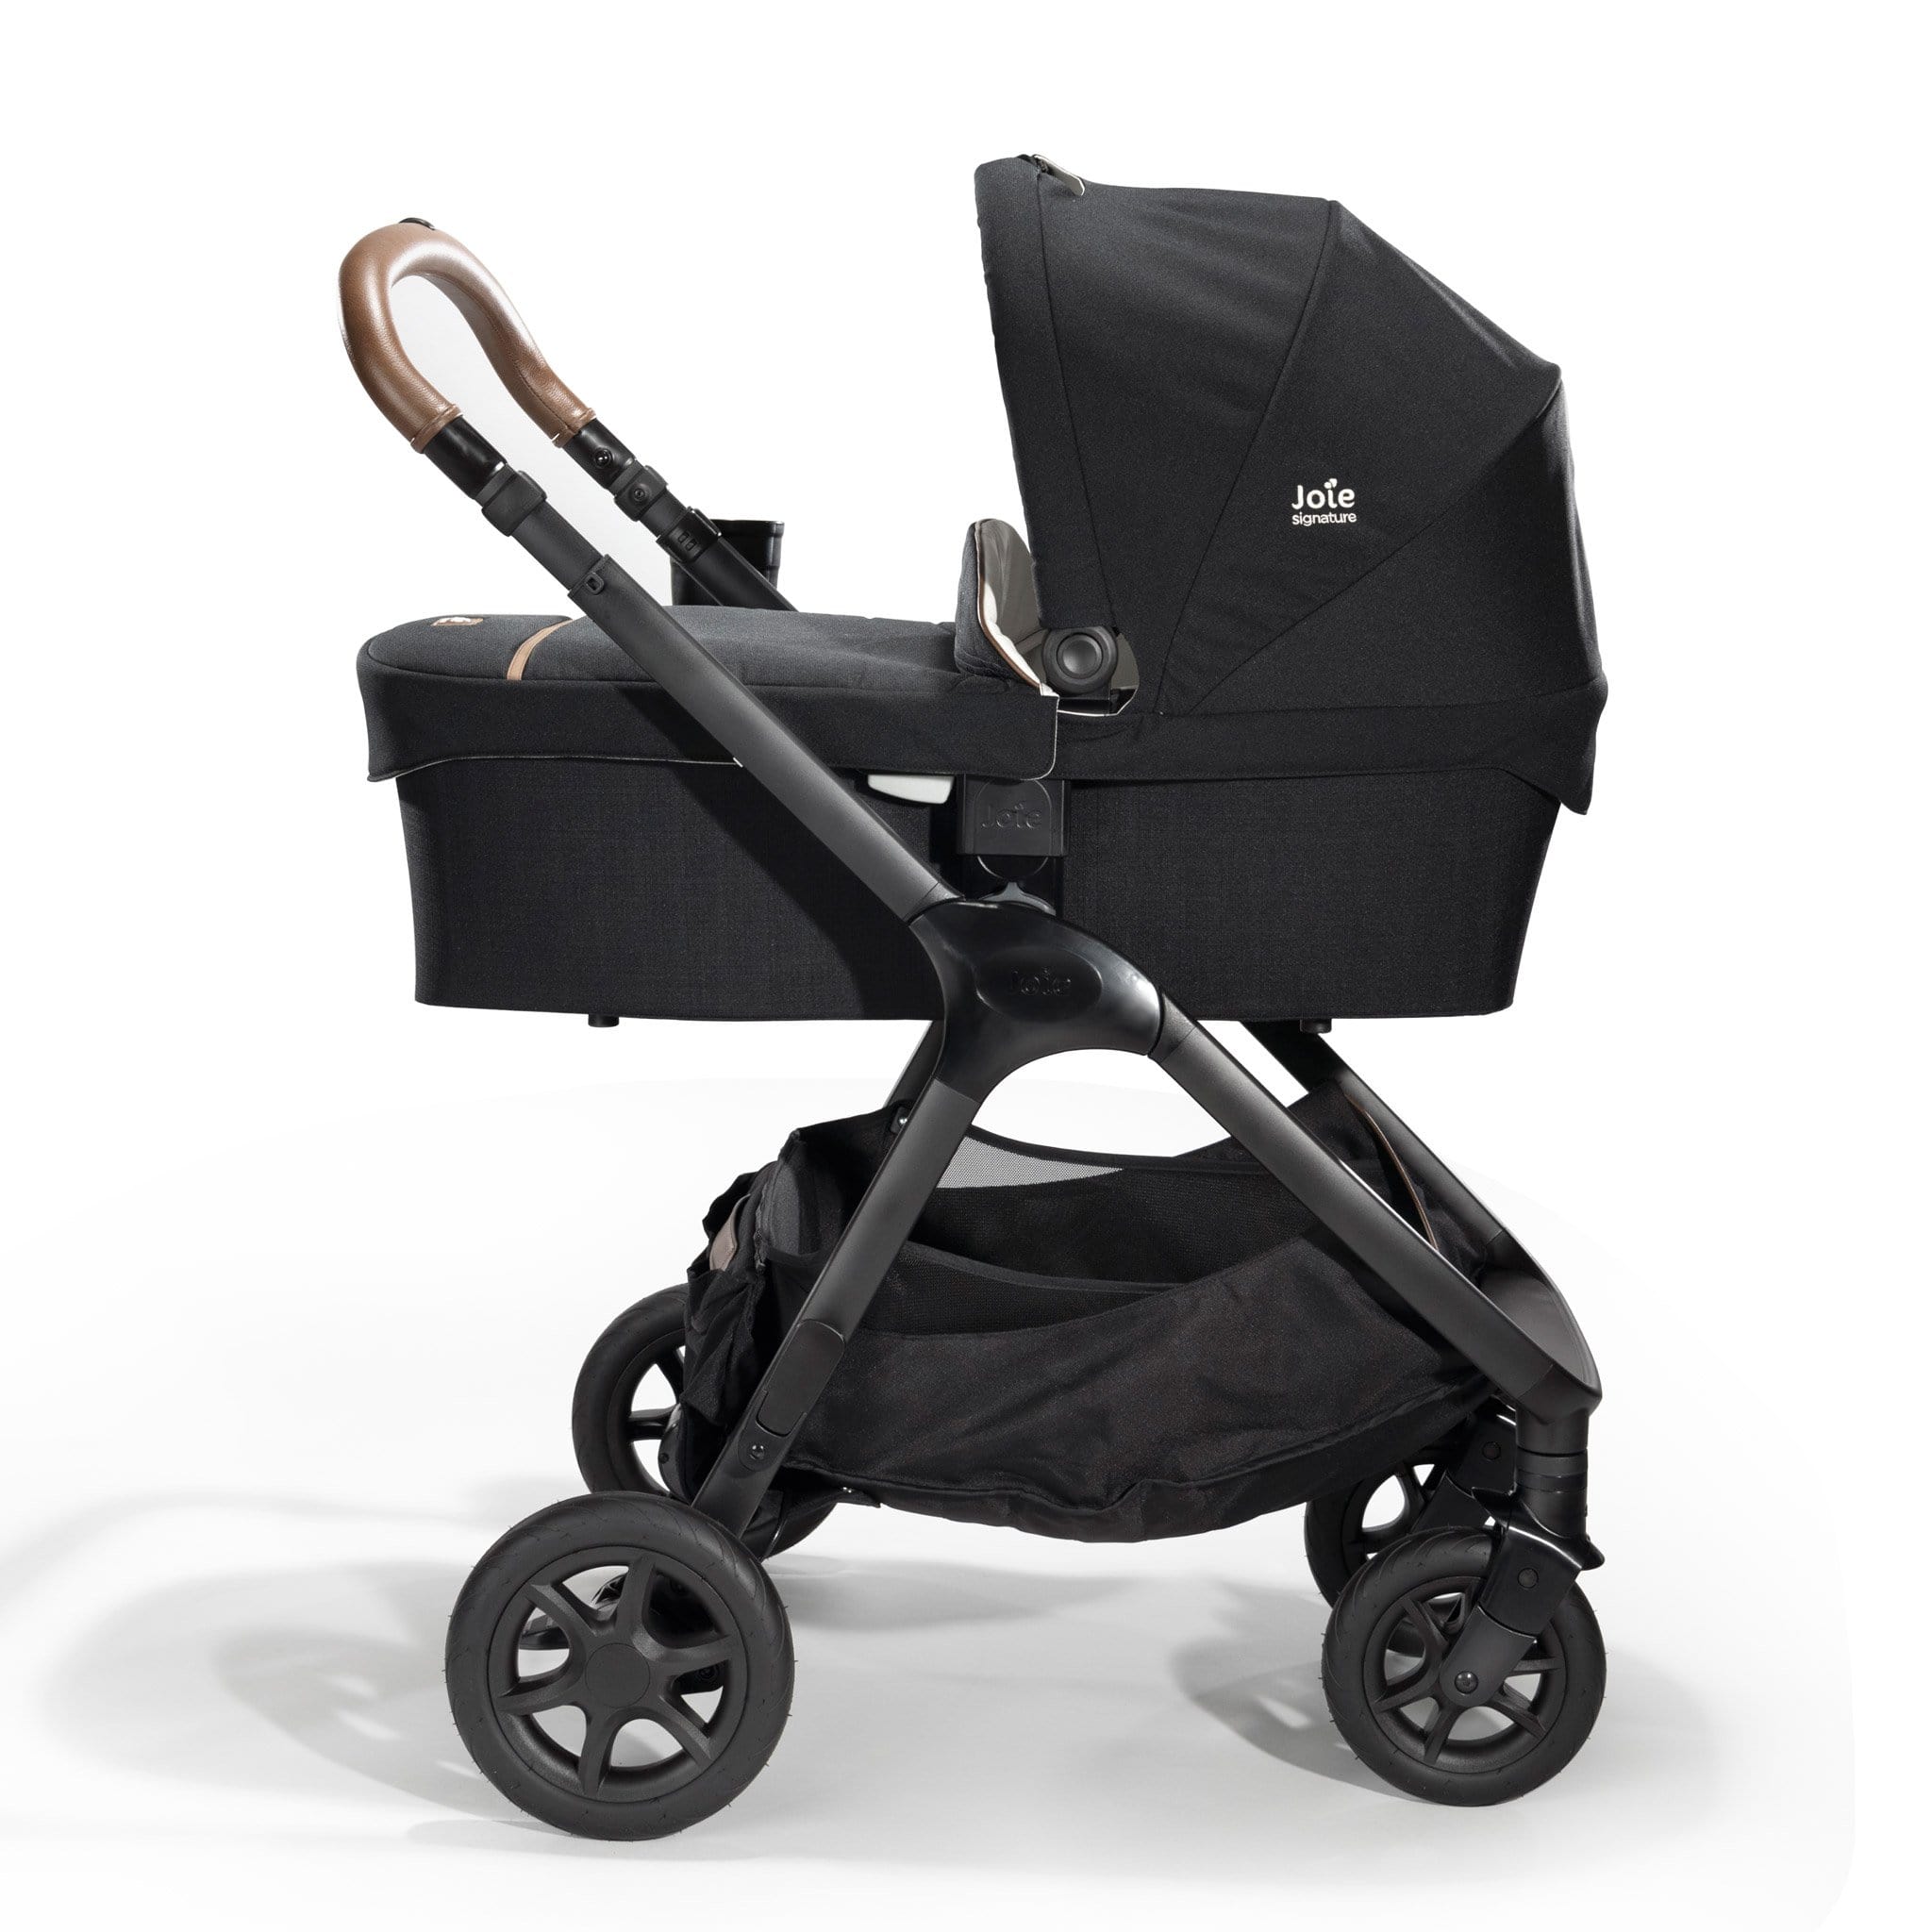 Joie baby prams Joie Finiti 4in1 Signature Edition Pushchair & Carrycot Eclipse